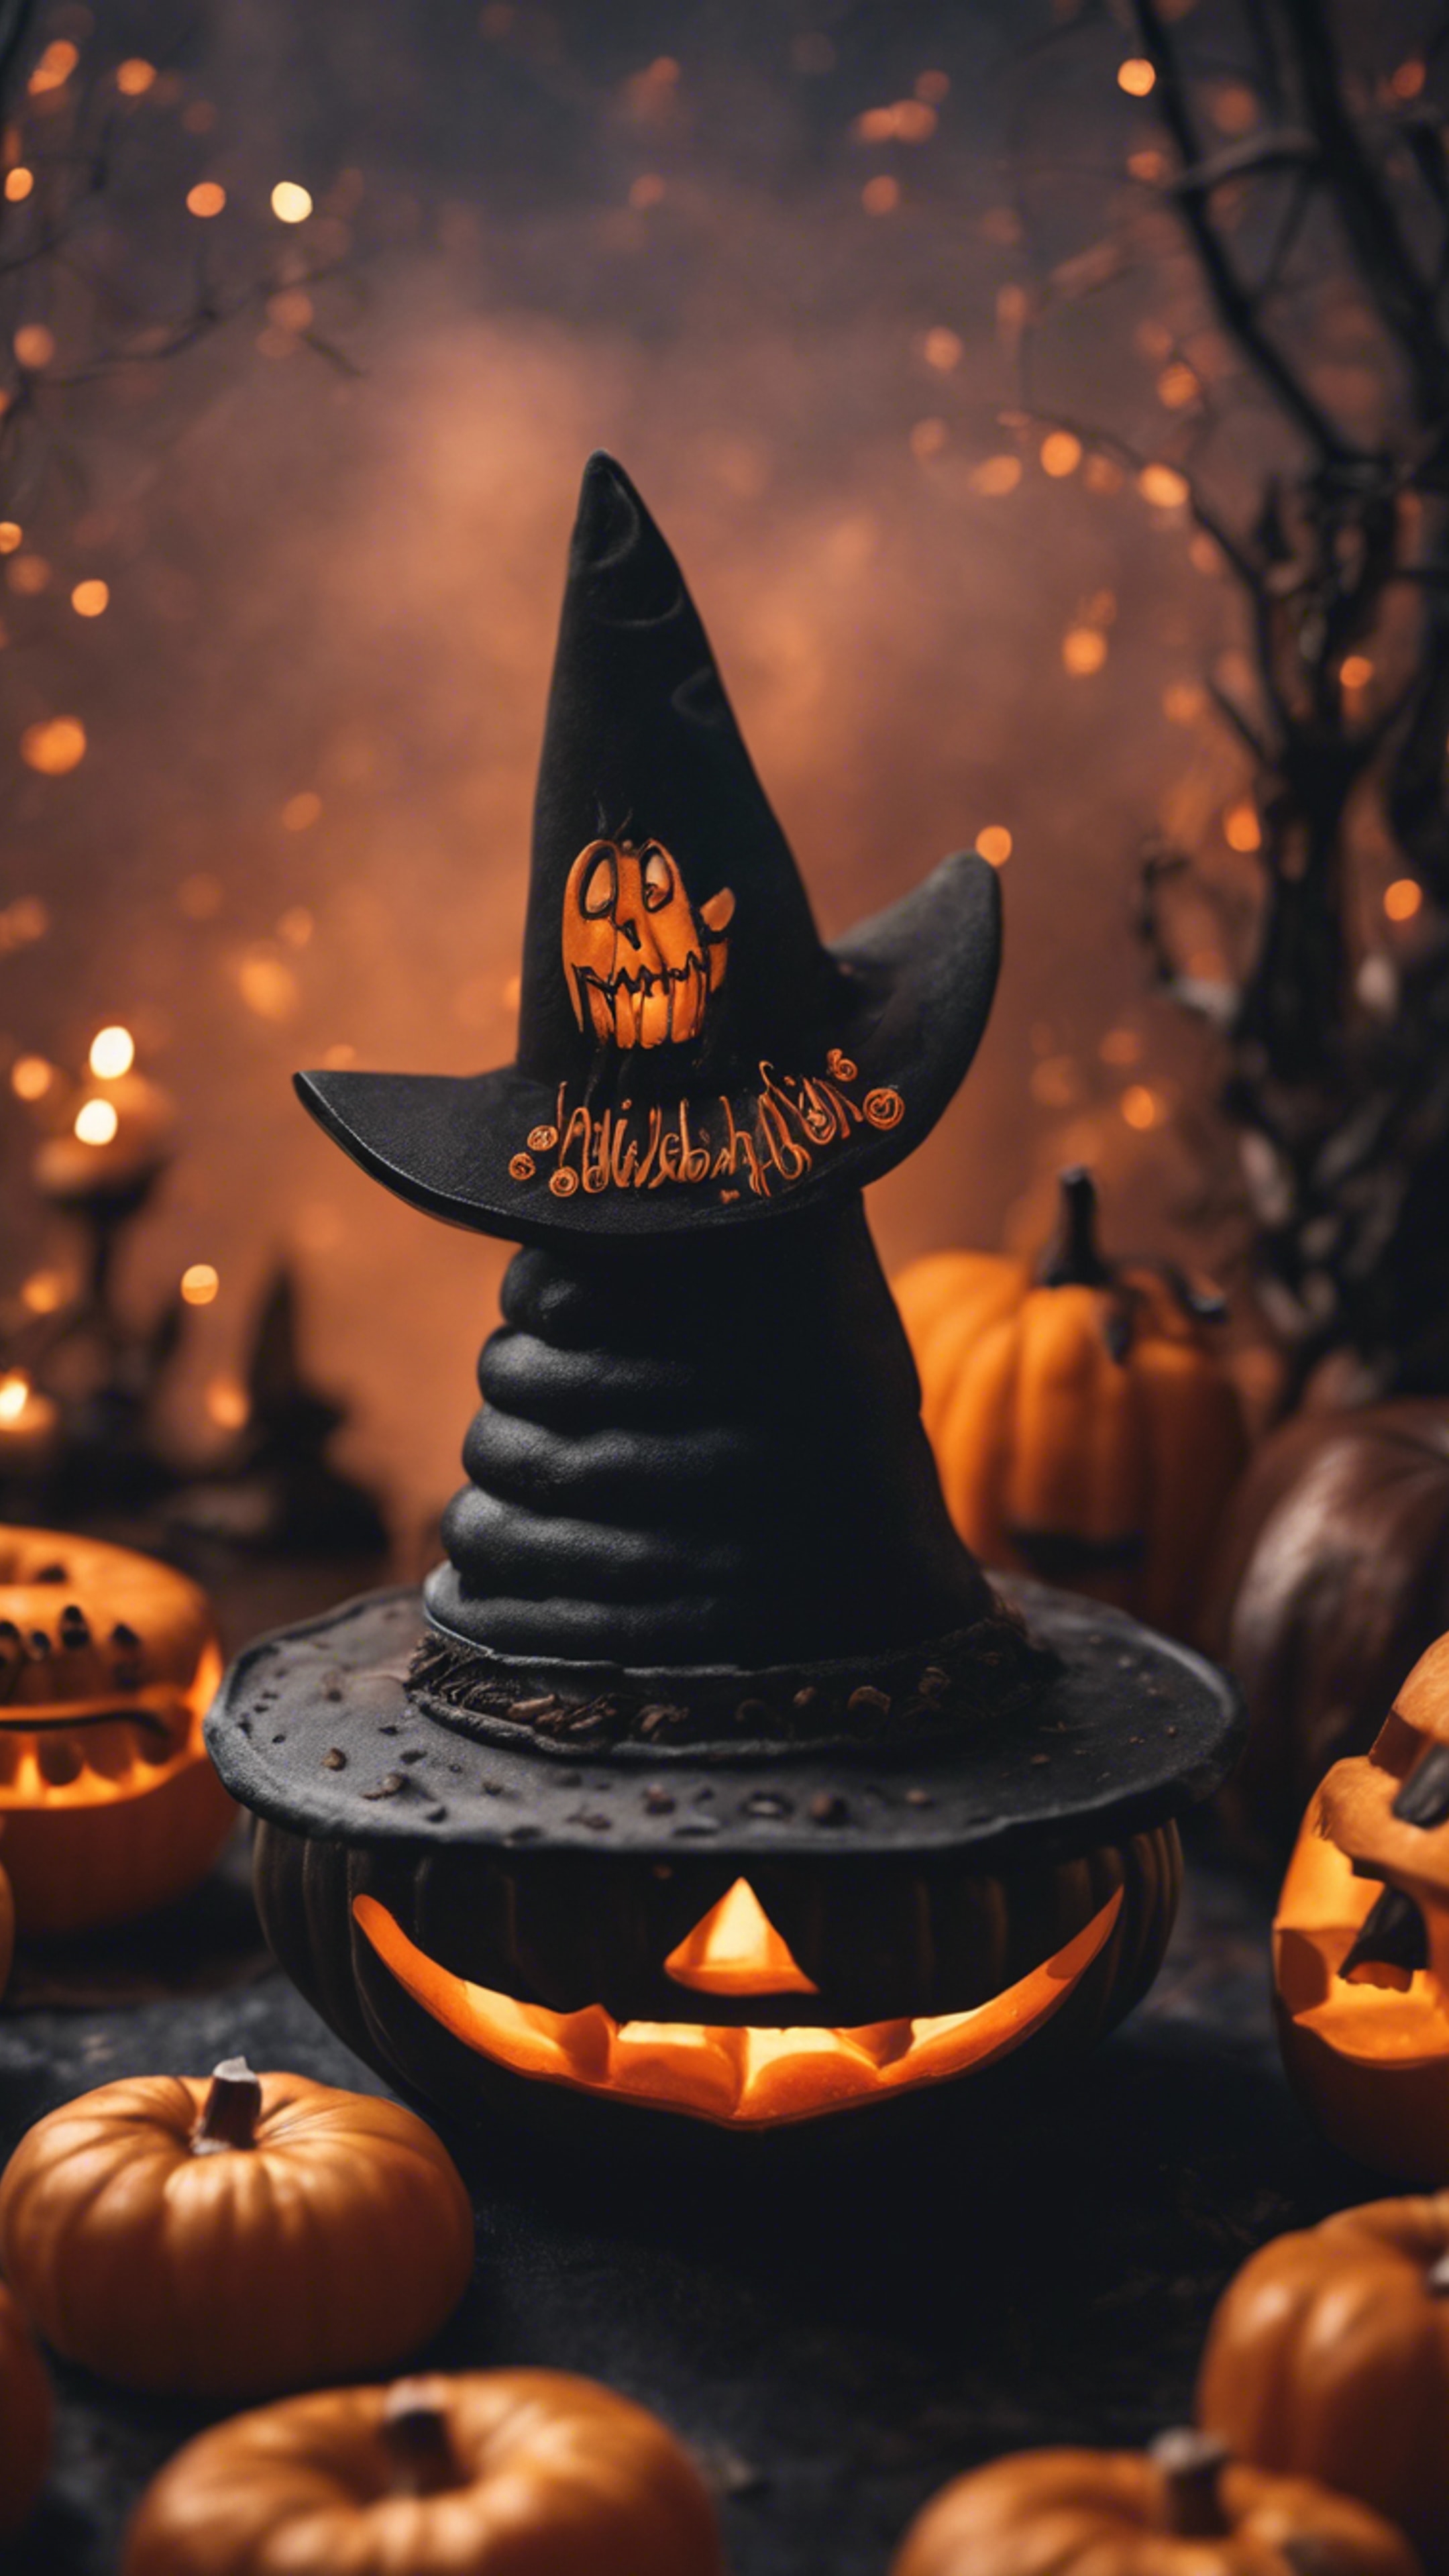 A spooky scene with jack-o-lanterns and a black witch's hat on a pumpkin-spiced donut. Tapeta[393956df6a264774b0c0]